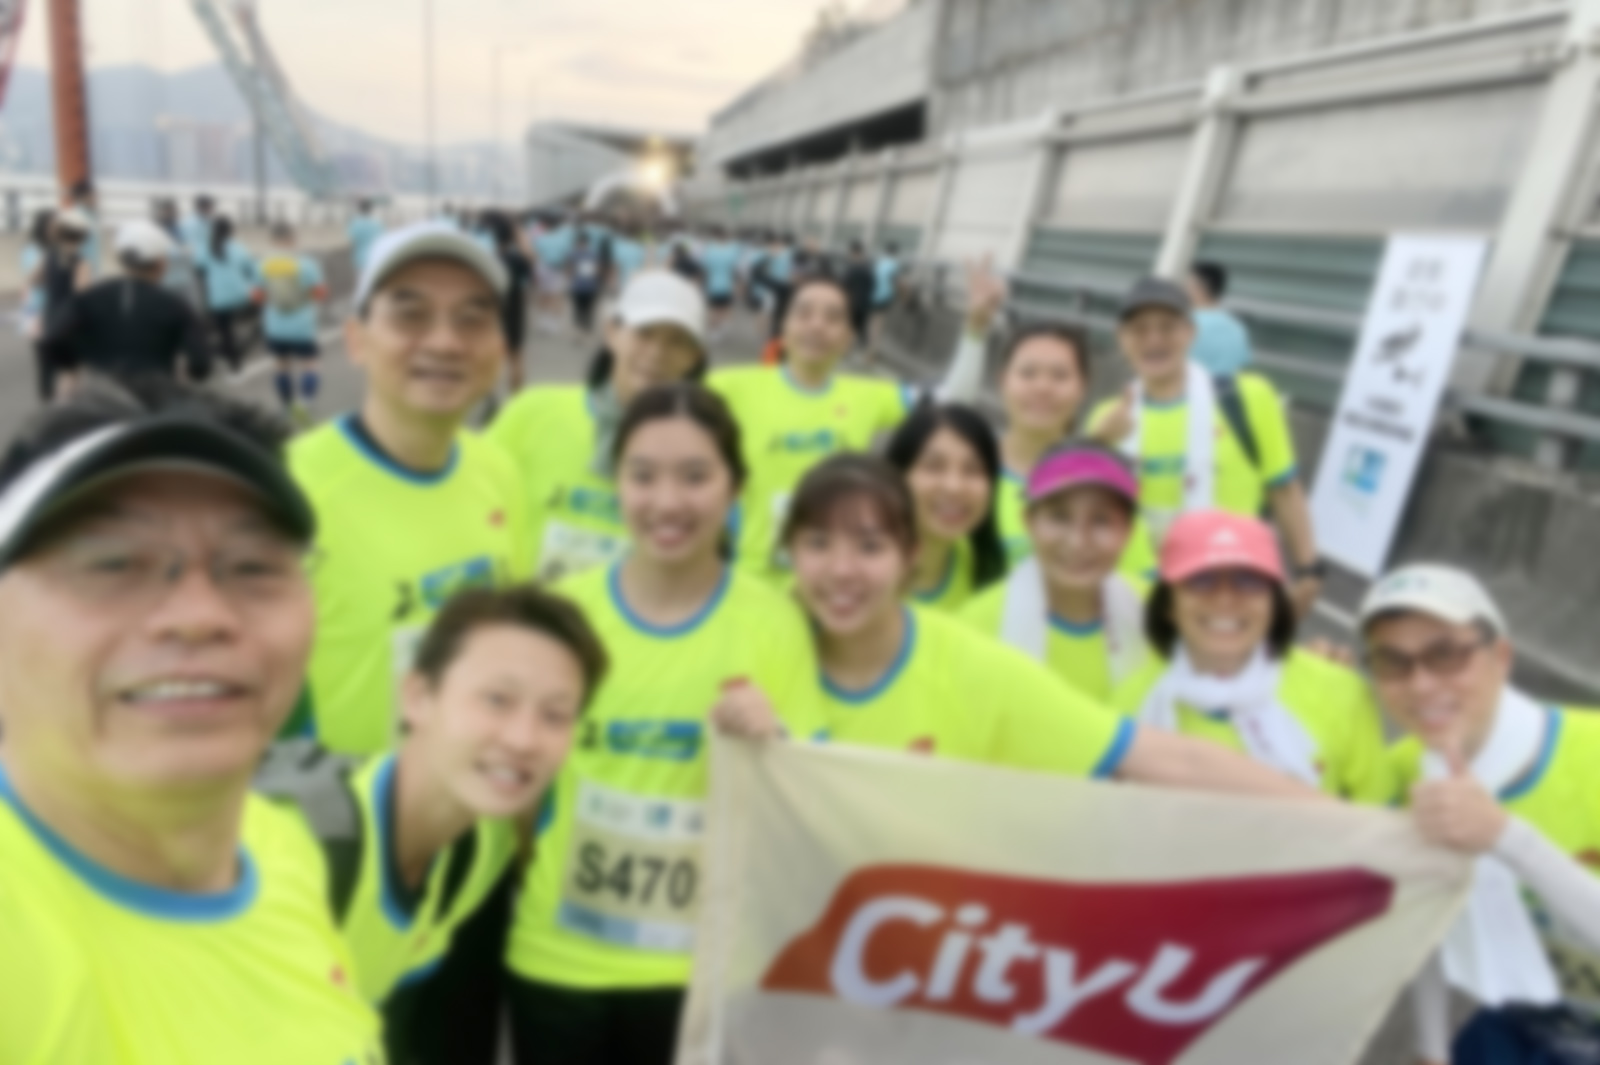 CityUHK runners unite for excellence